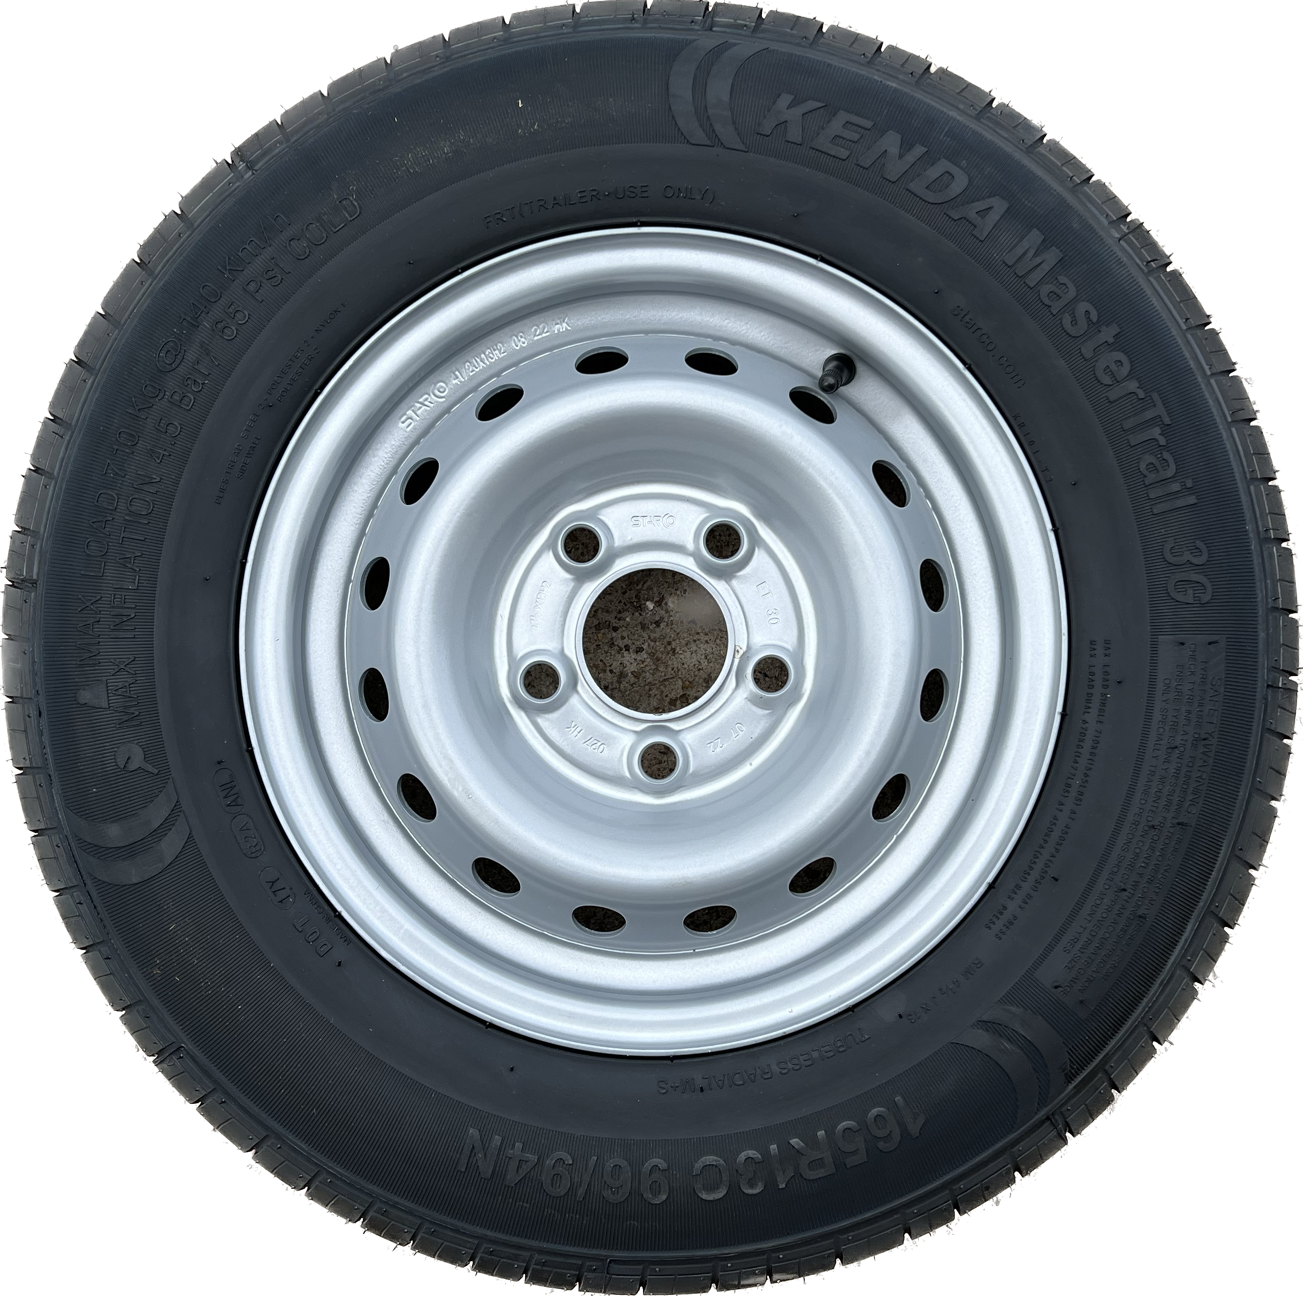 165 R 13 8ply (5 x 112mm pcd) trailer wheel and tyre